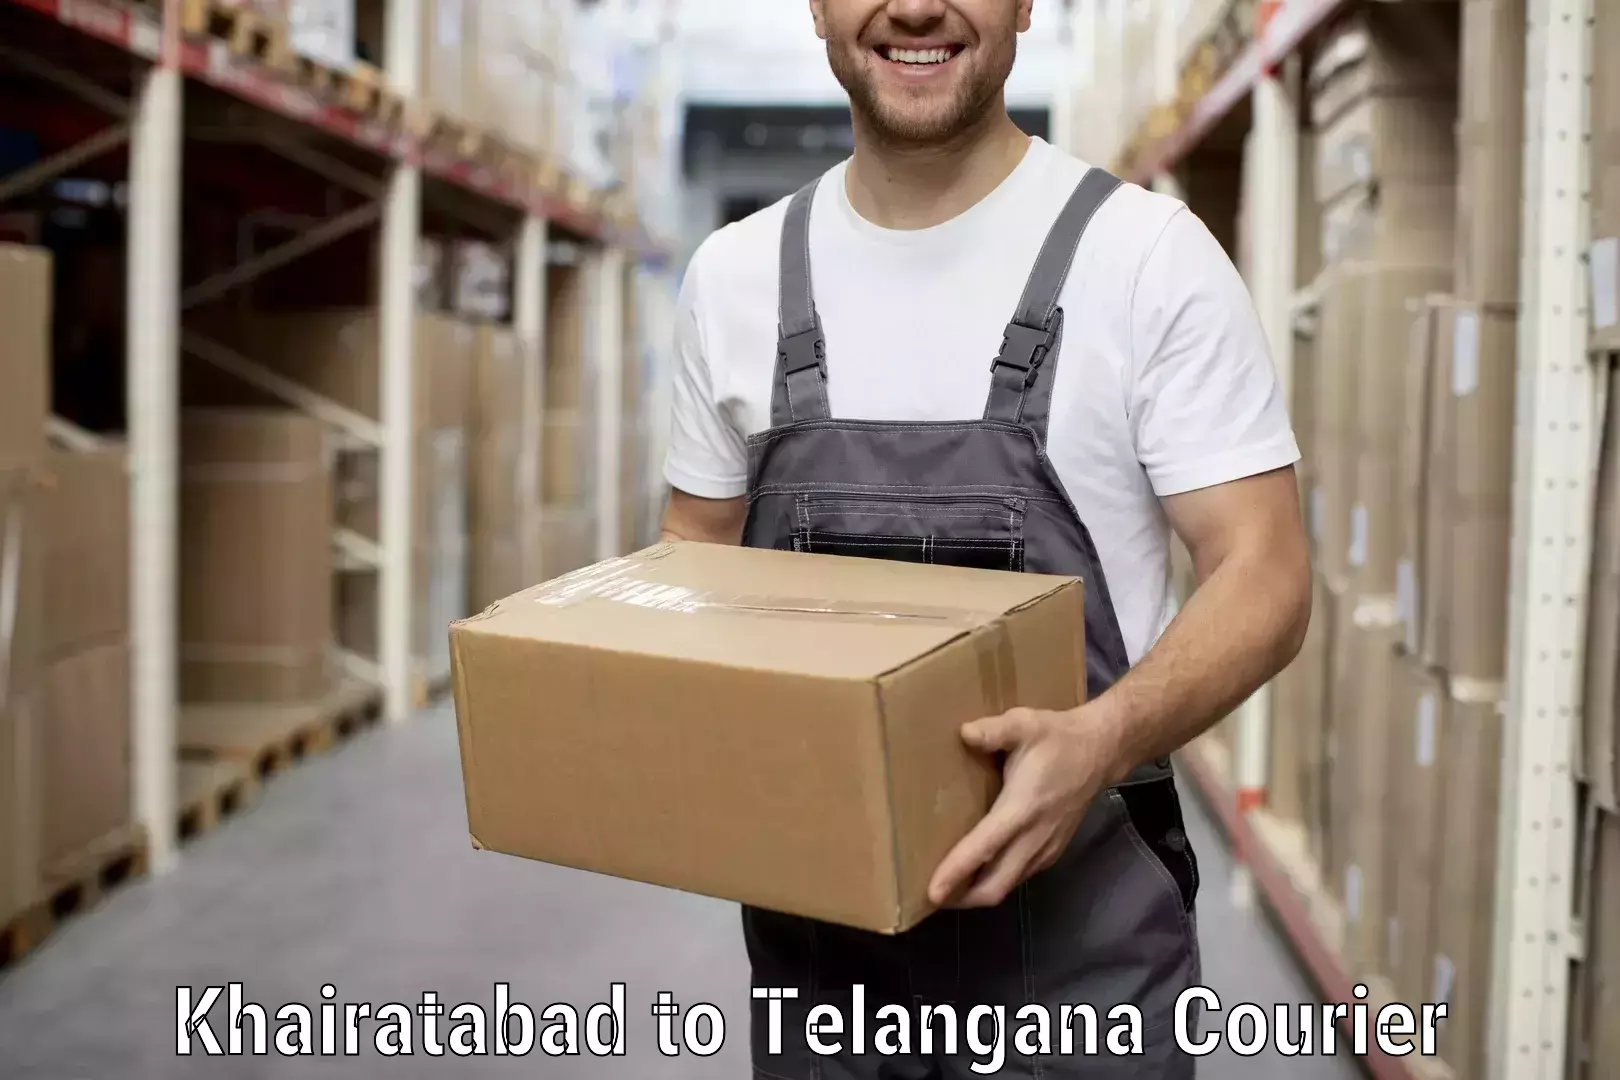 Dependable moving services in Khairatabad to Sultanabad